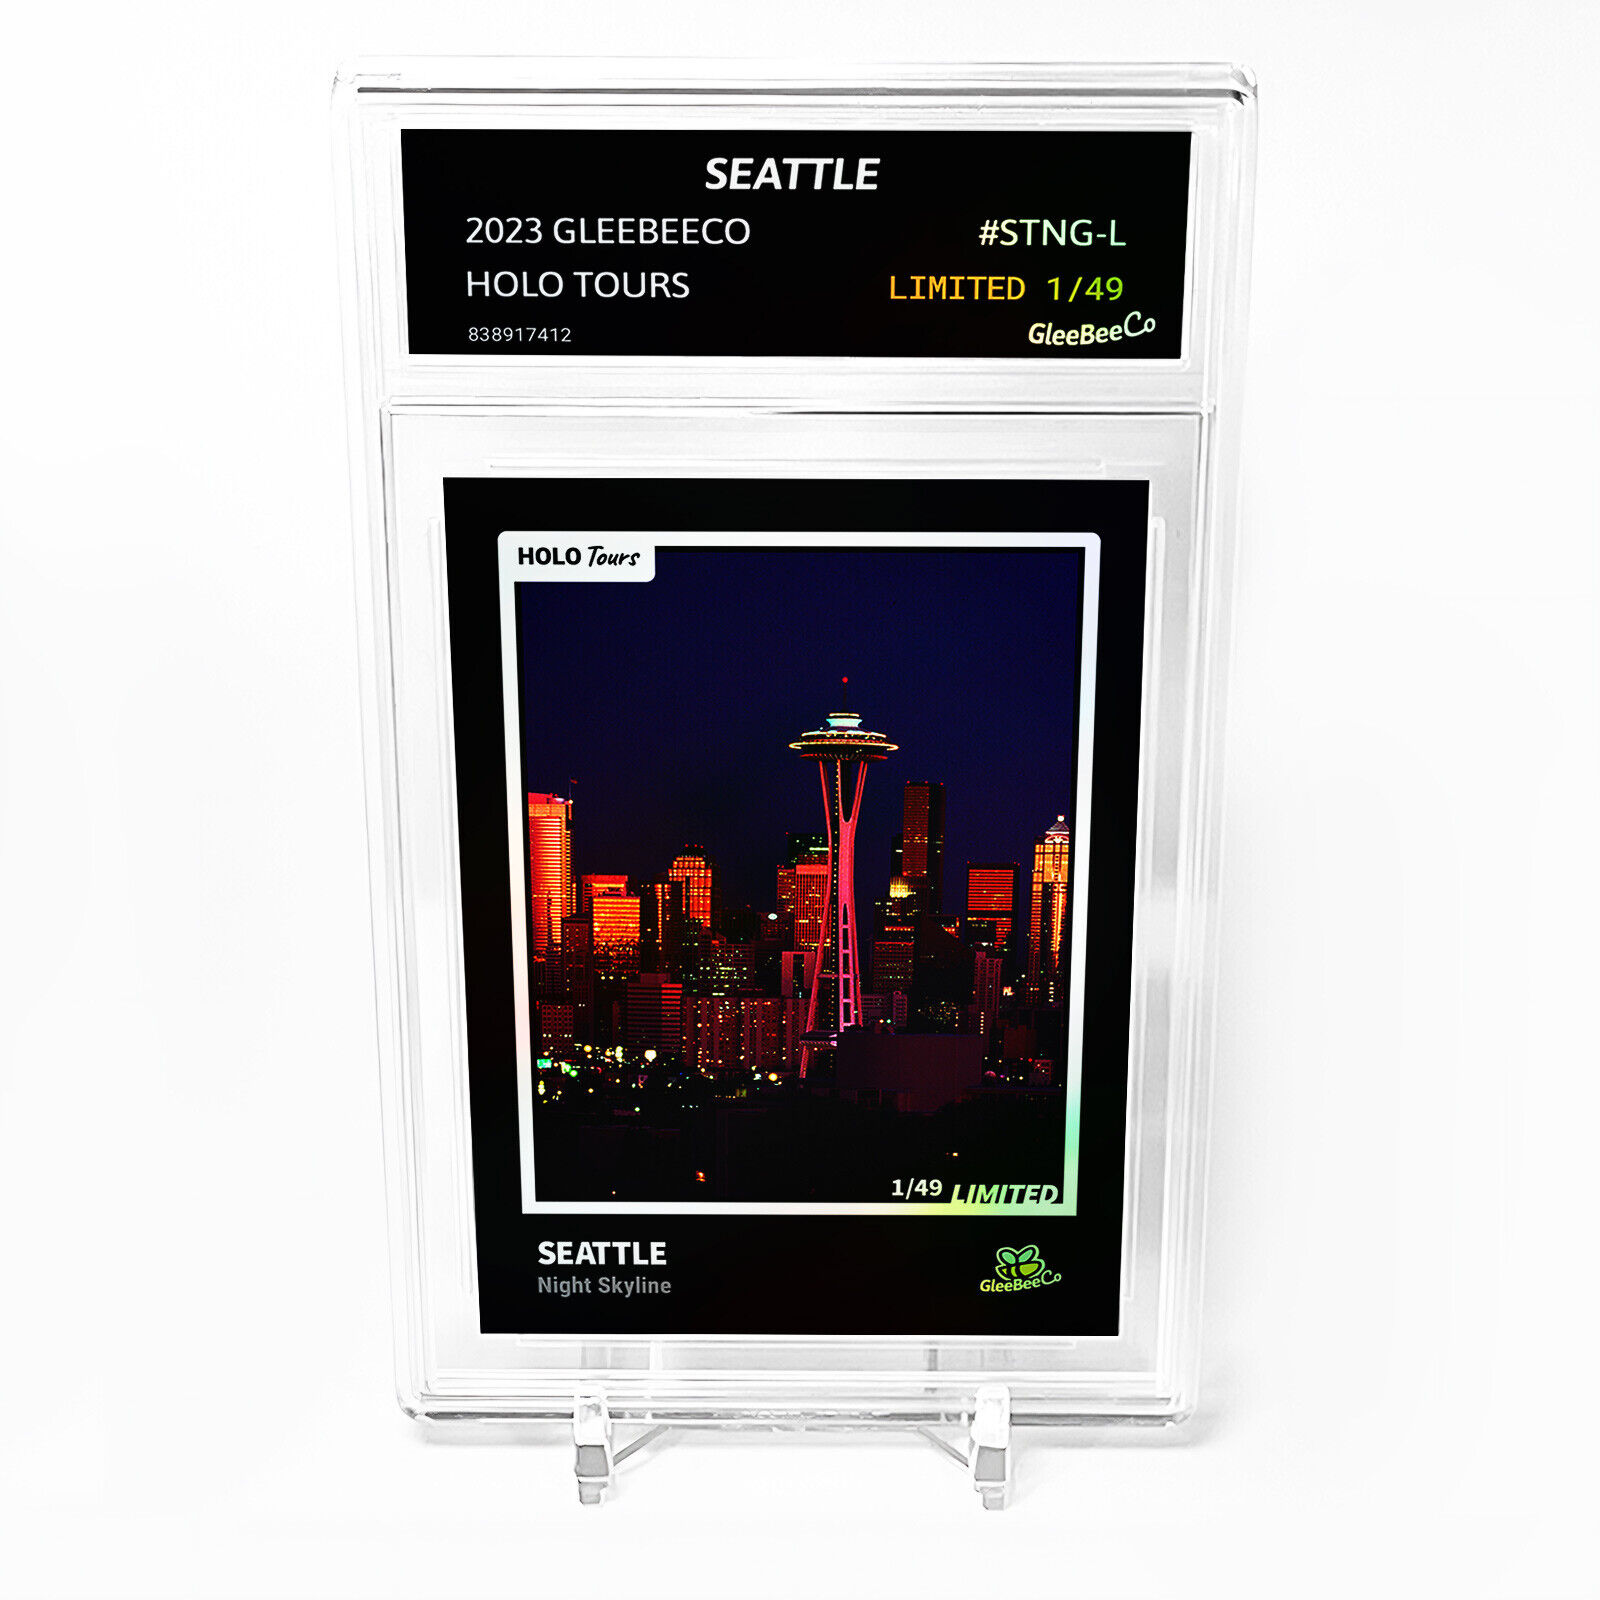 SEATTLE Night Skyline Card 2023 GleeBeeCo Holo Tours *Slab* #STNG-L Only /49